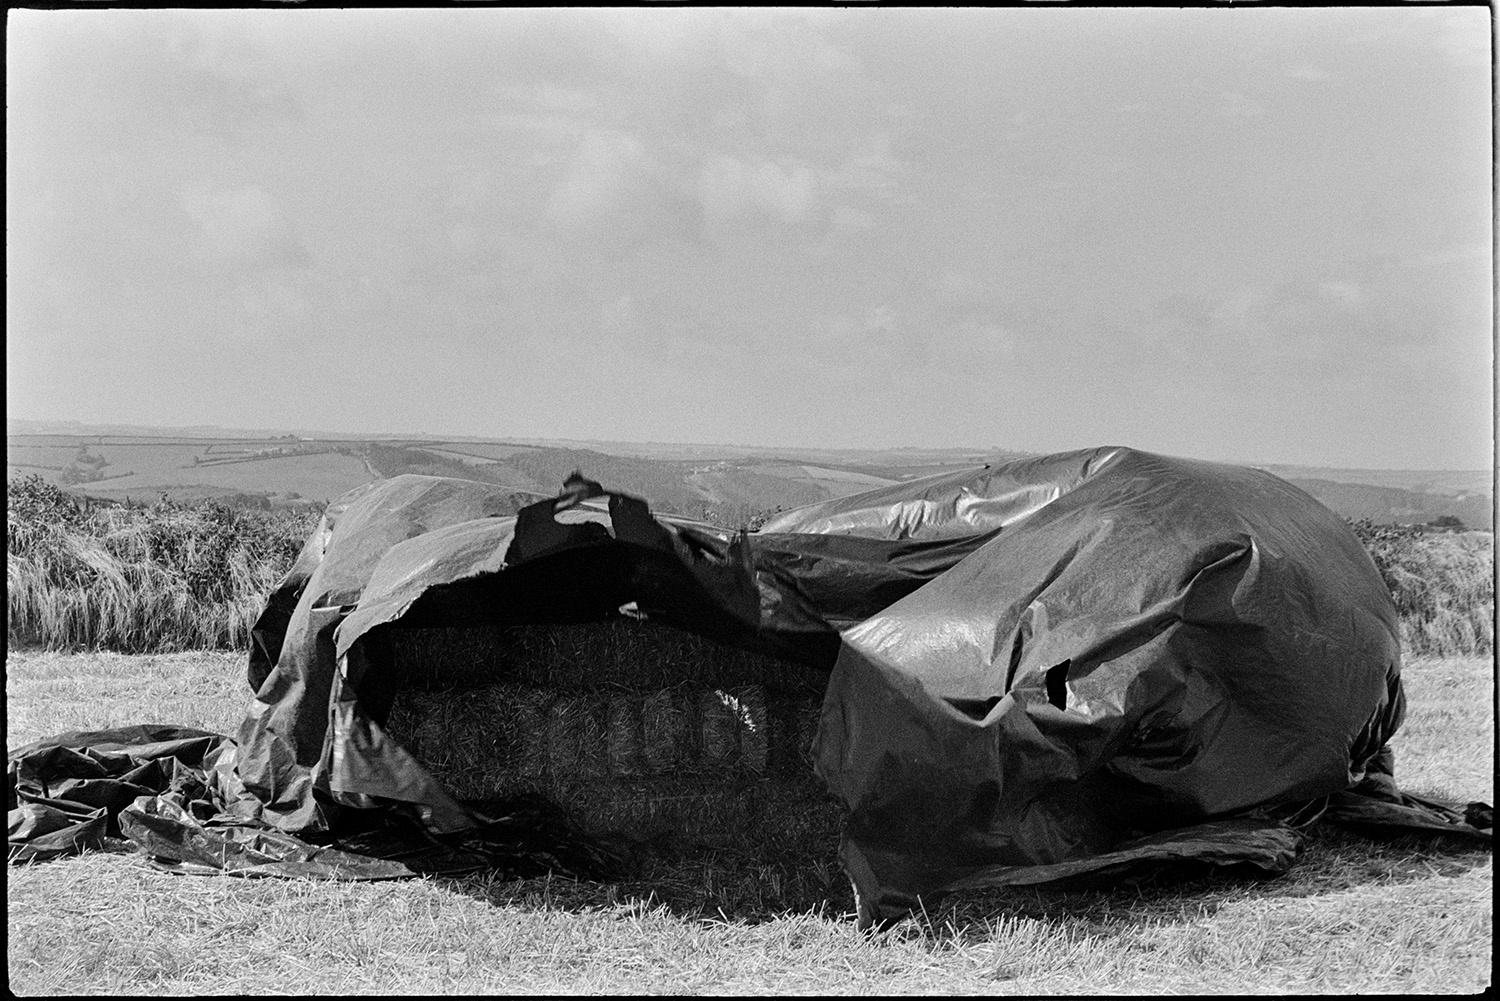 Bales covered with polythene sheet blown in wind. 
[Hay bales covered by a polythene sheet blowing in the wind, in a field at Beaford.]